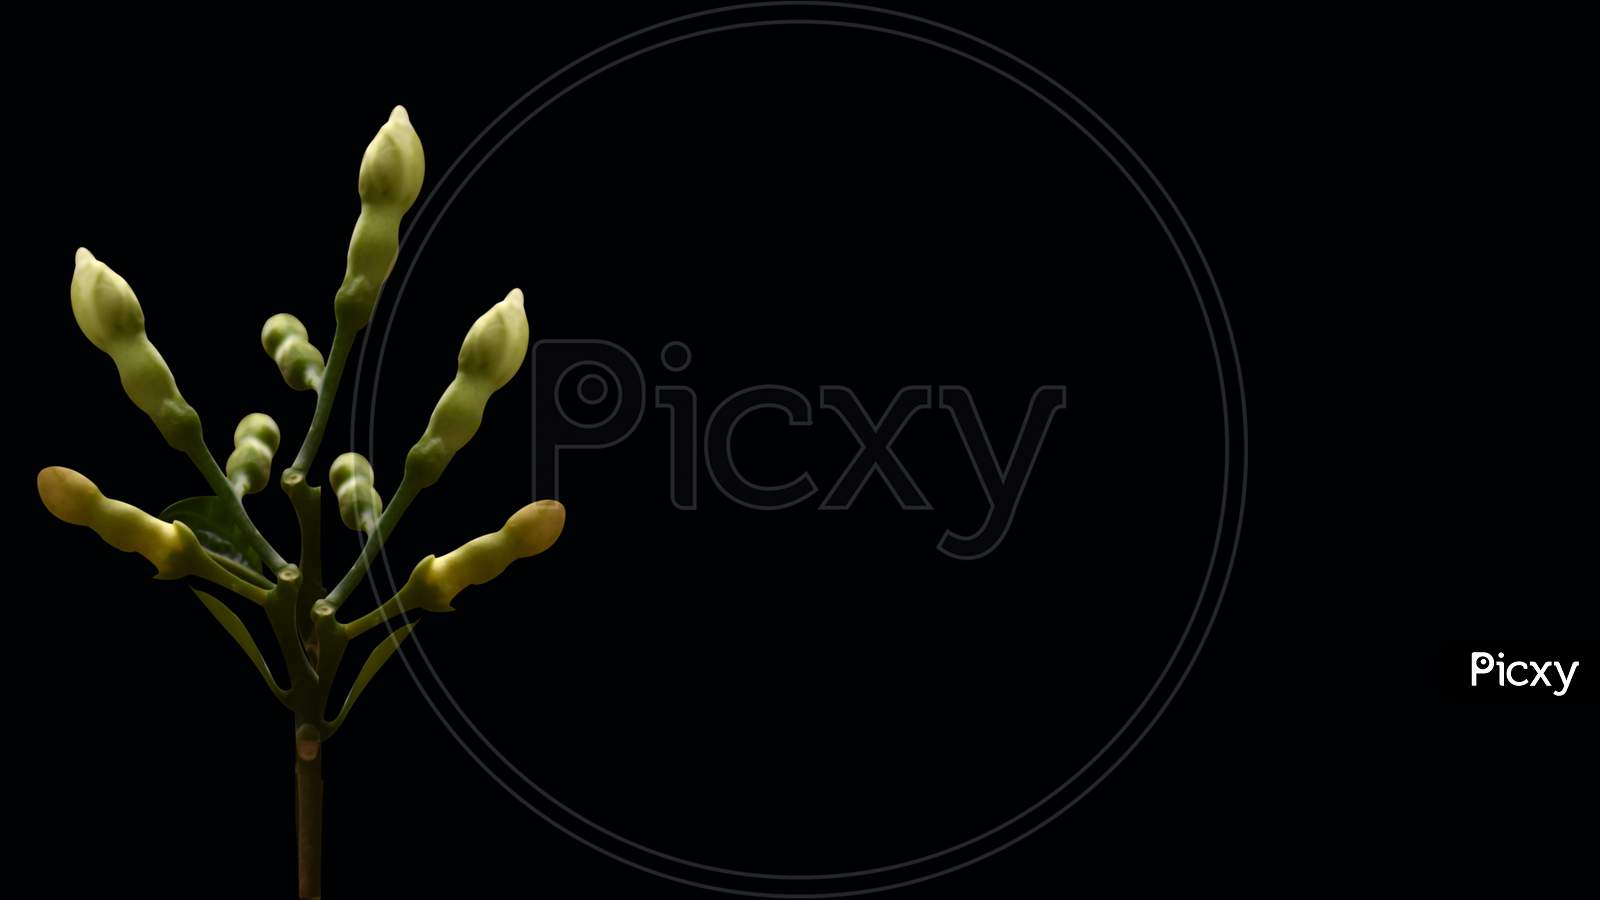 Beautiful Flower Bud Isolated On Black Background With Texture Space Available